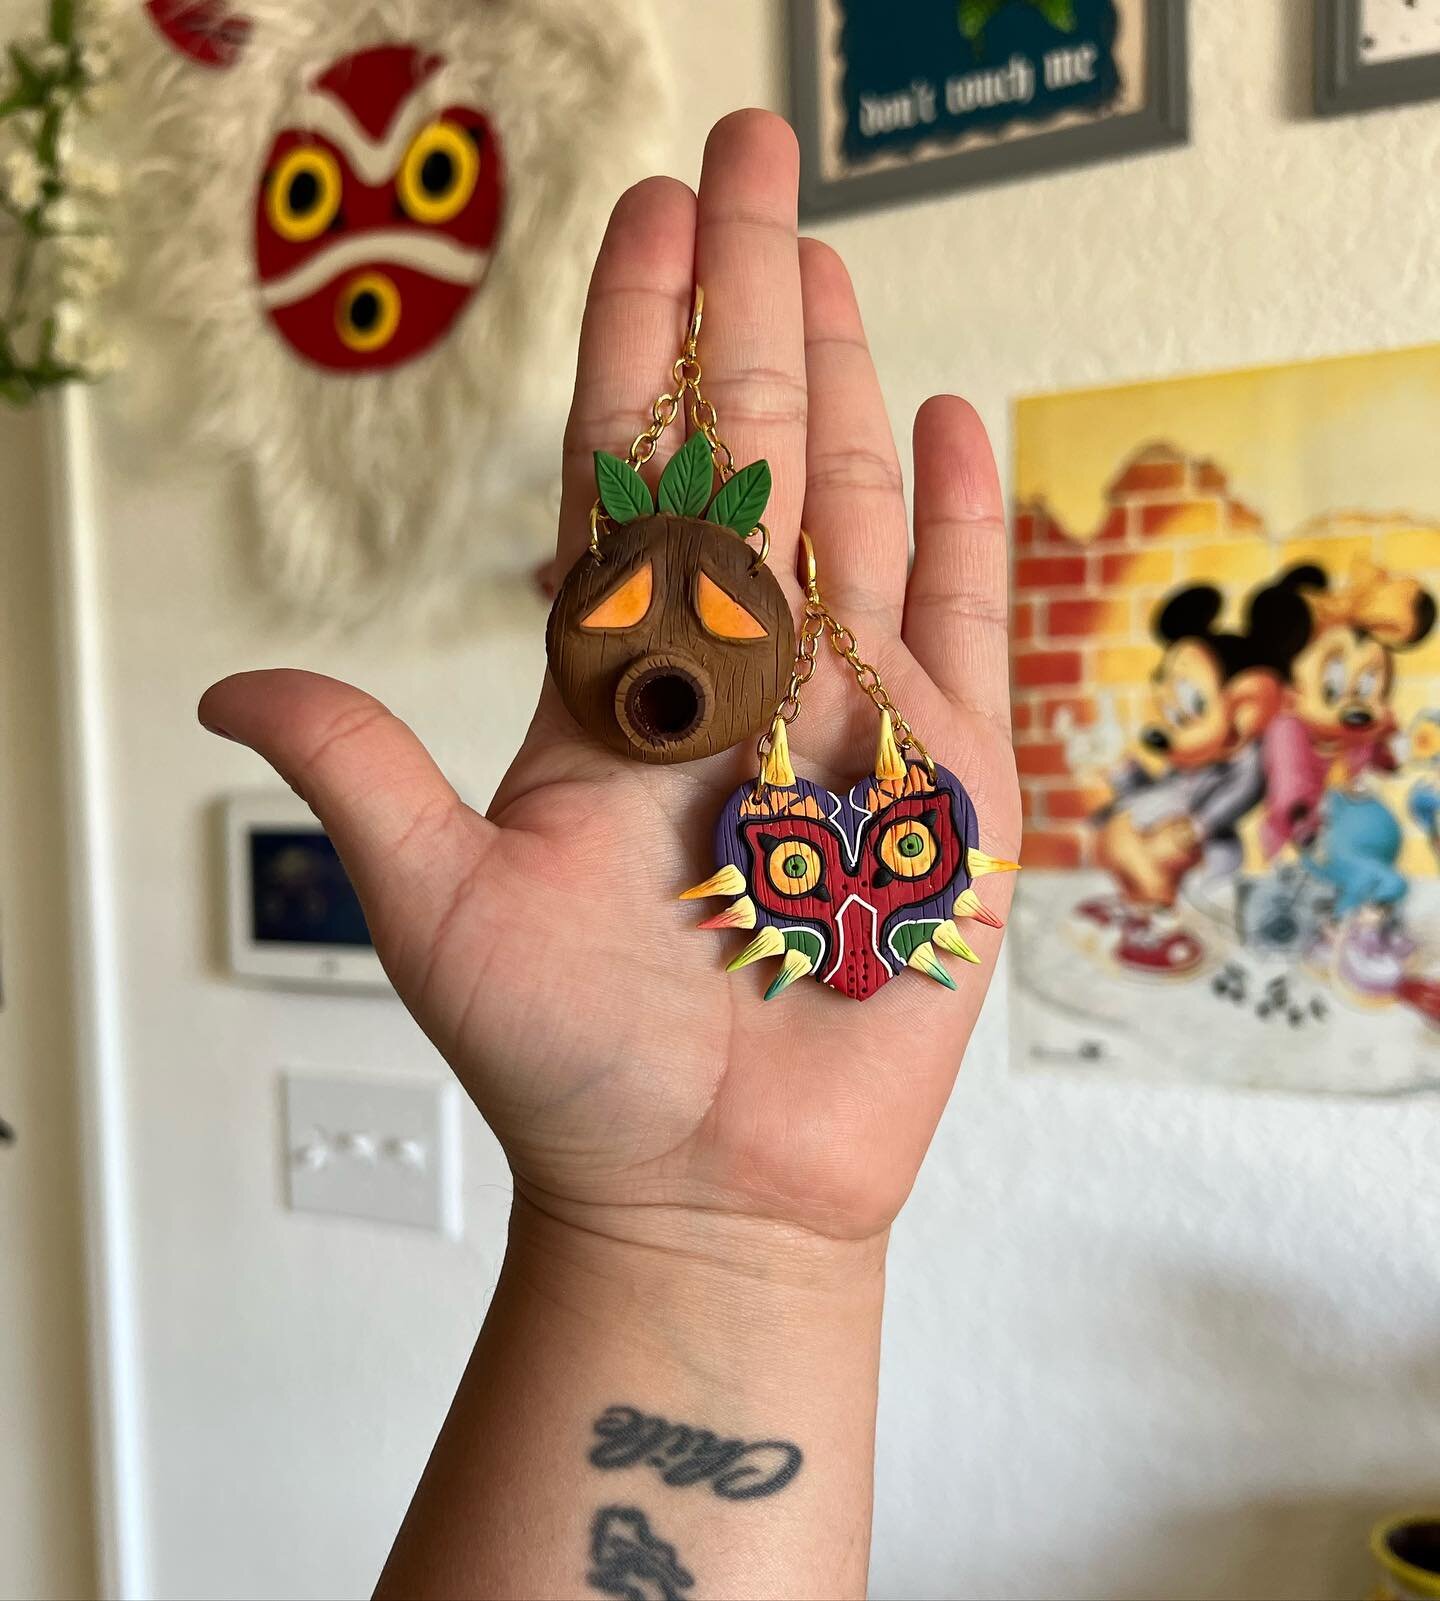 Deku &amp; Majora mask customs 🖤

NFS! Loves having to sculpt these pieces 🥹 really proud of them!